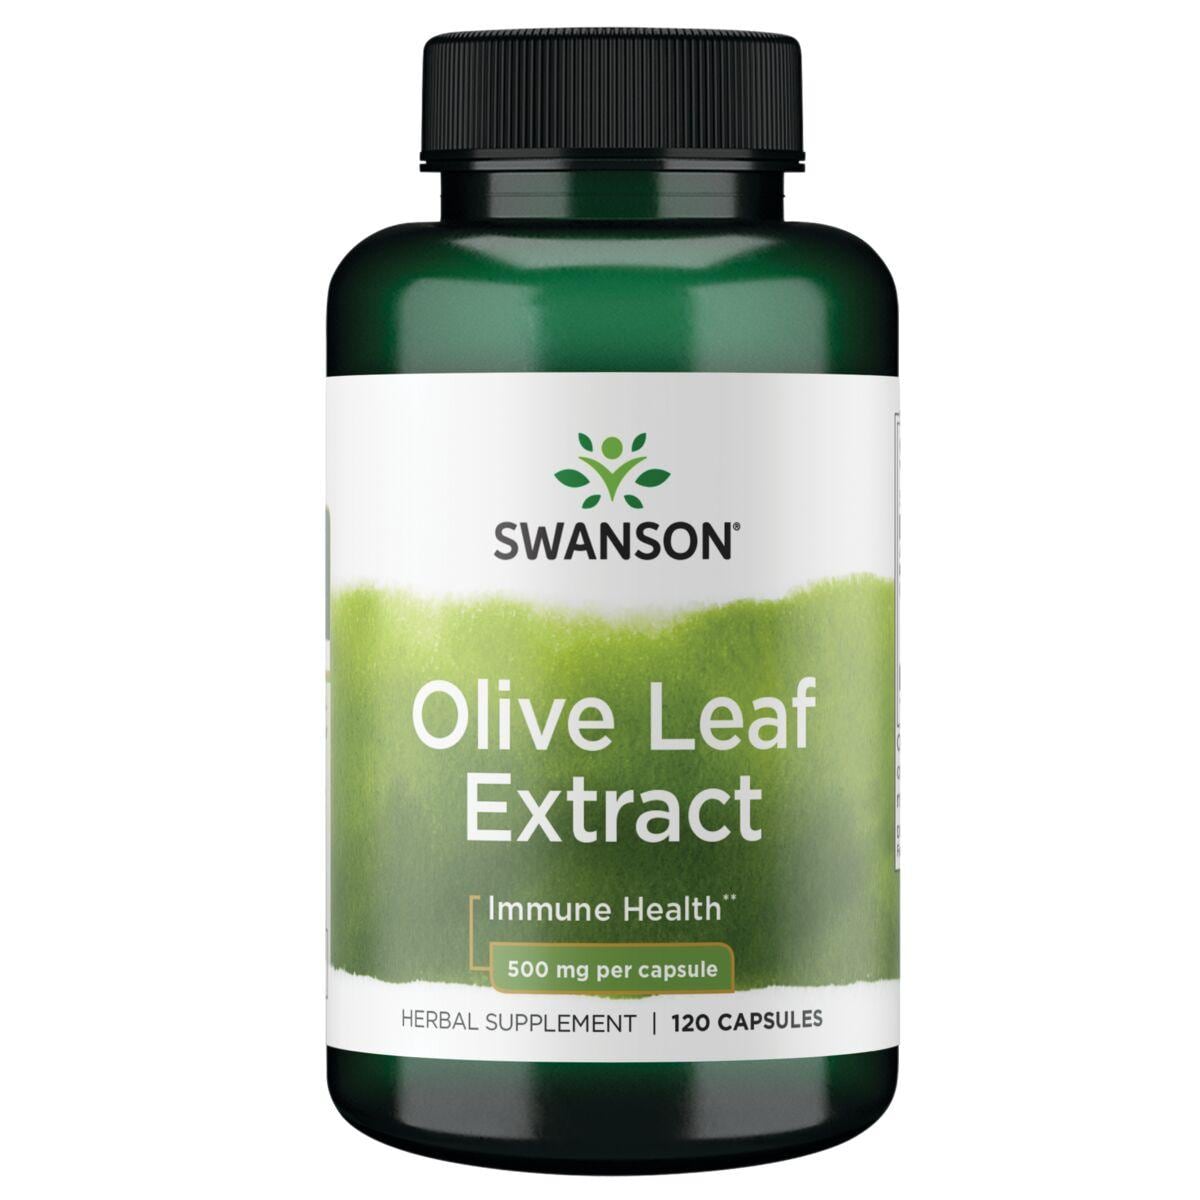 Swanson Superior Herbs Olive Leaf Extract Vitamin | 500 mg | 120 Caps